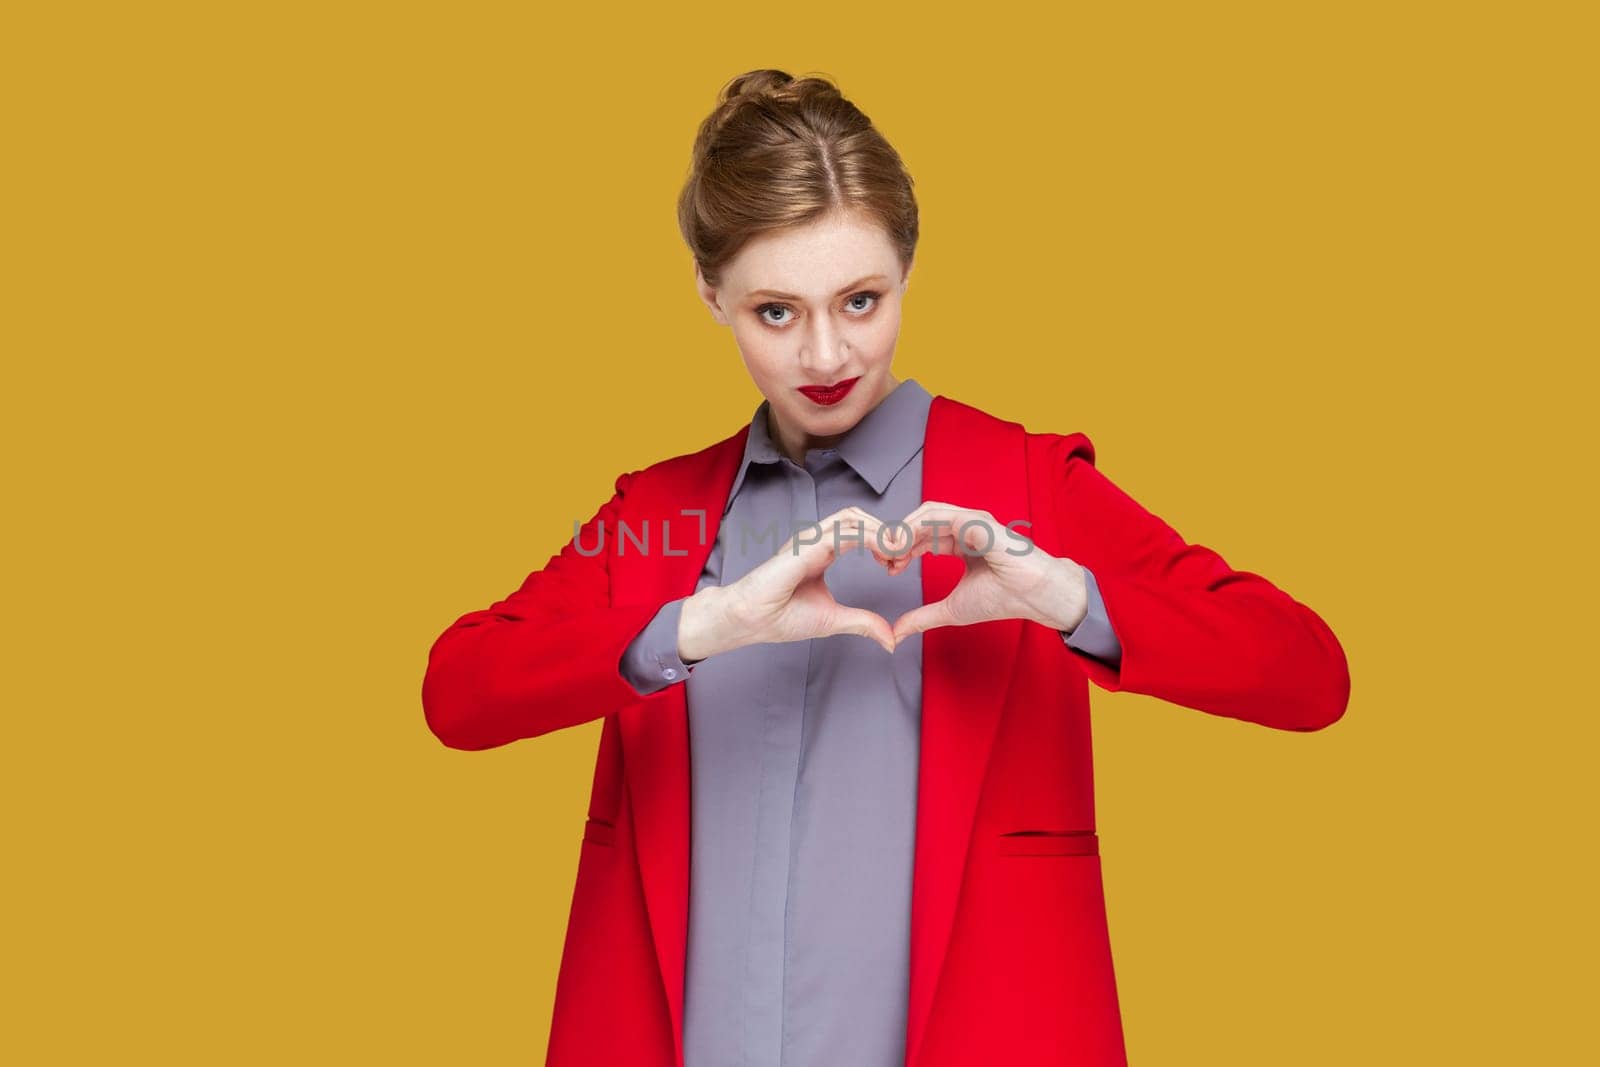 Portrait of romantic flirting woman with red lips standing showing heart shape with hands, looking at camera, expressing devotion, wearing red jacket. Indoor studio shot isolated on yellow background.